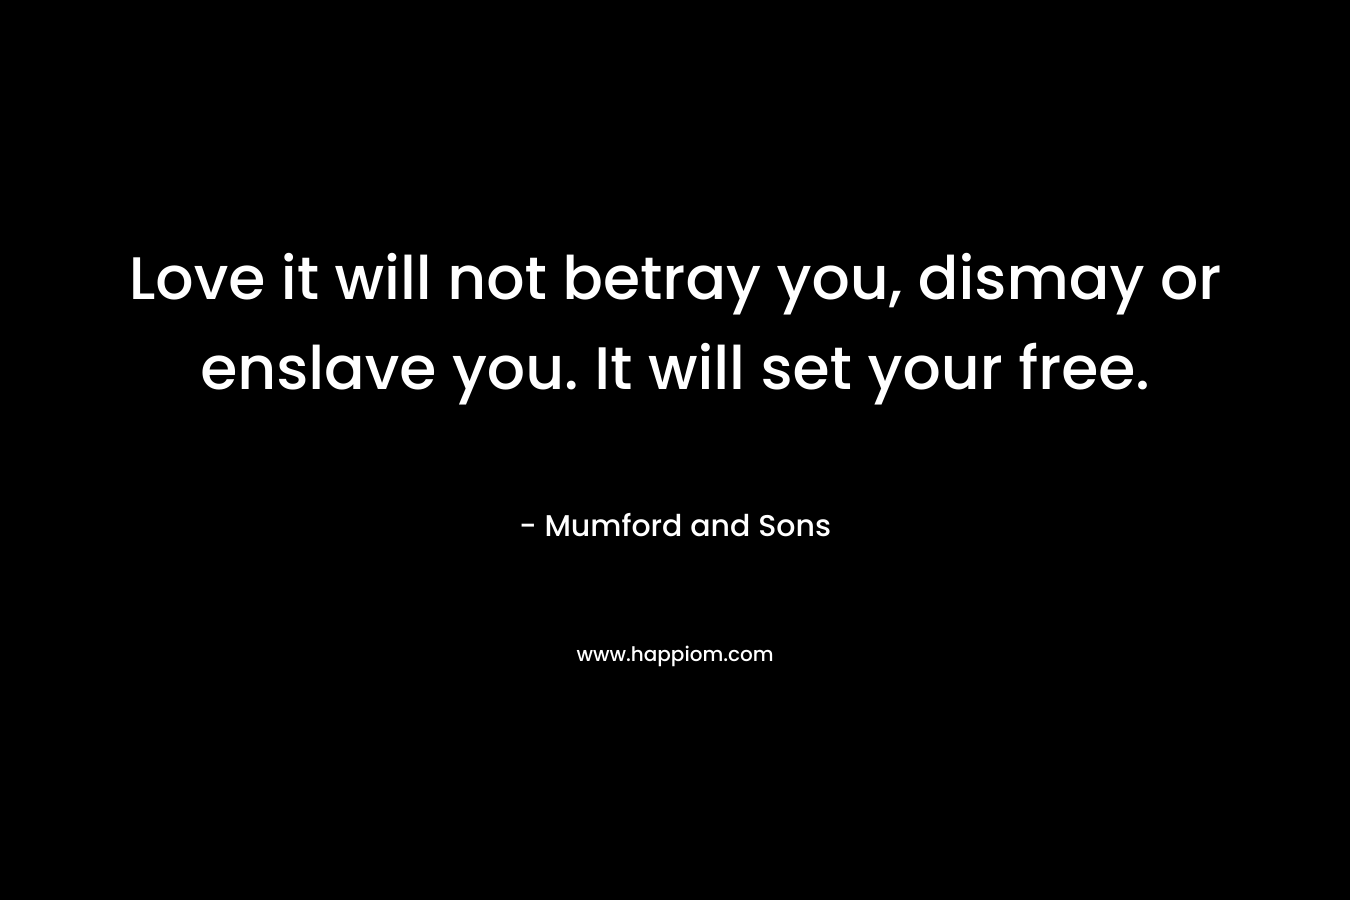 Love it will not betray you, dismay or enslave you. It will set your free. – Mumford and Sons